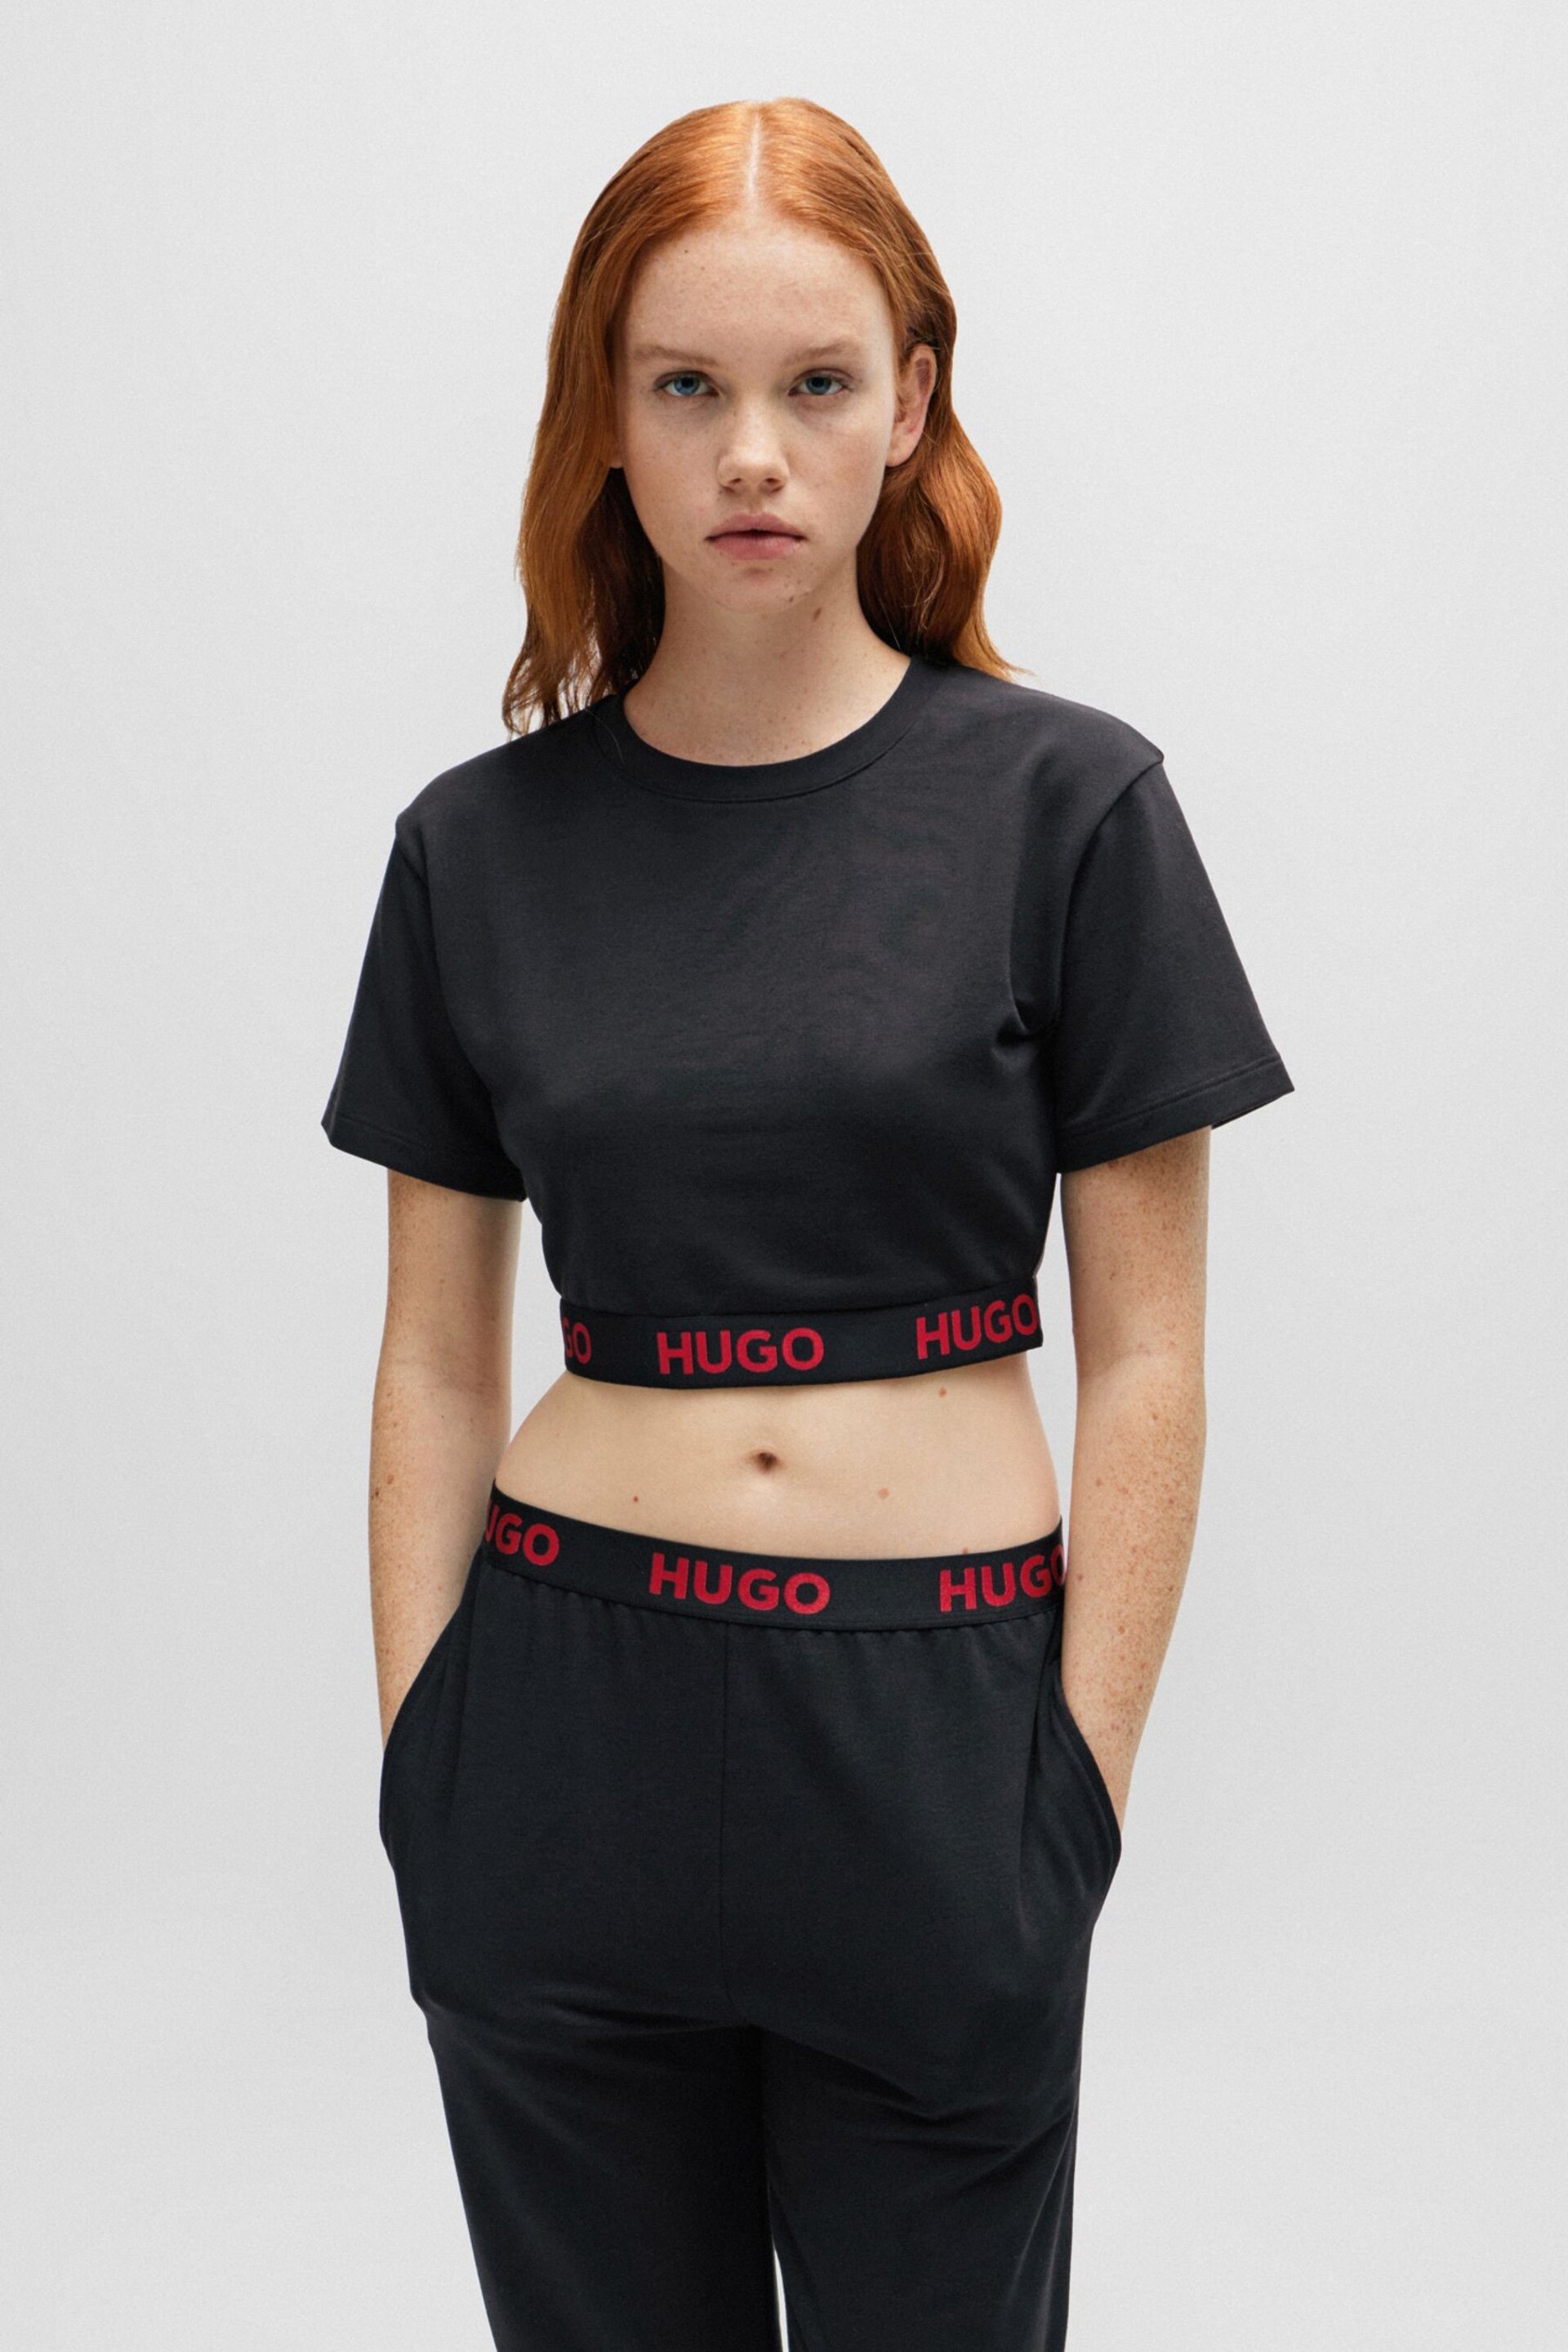 HUGO Cropped Black T-Shirt in Stretch Fabric With Logo Waistband Crop Top - Image 2 of 6